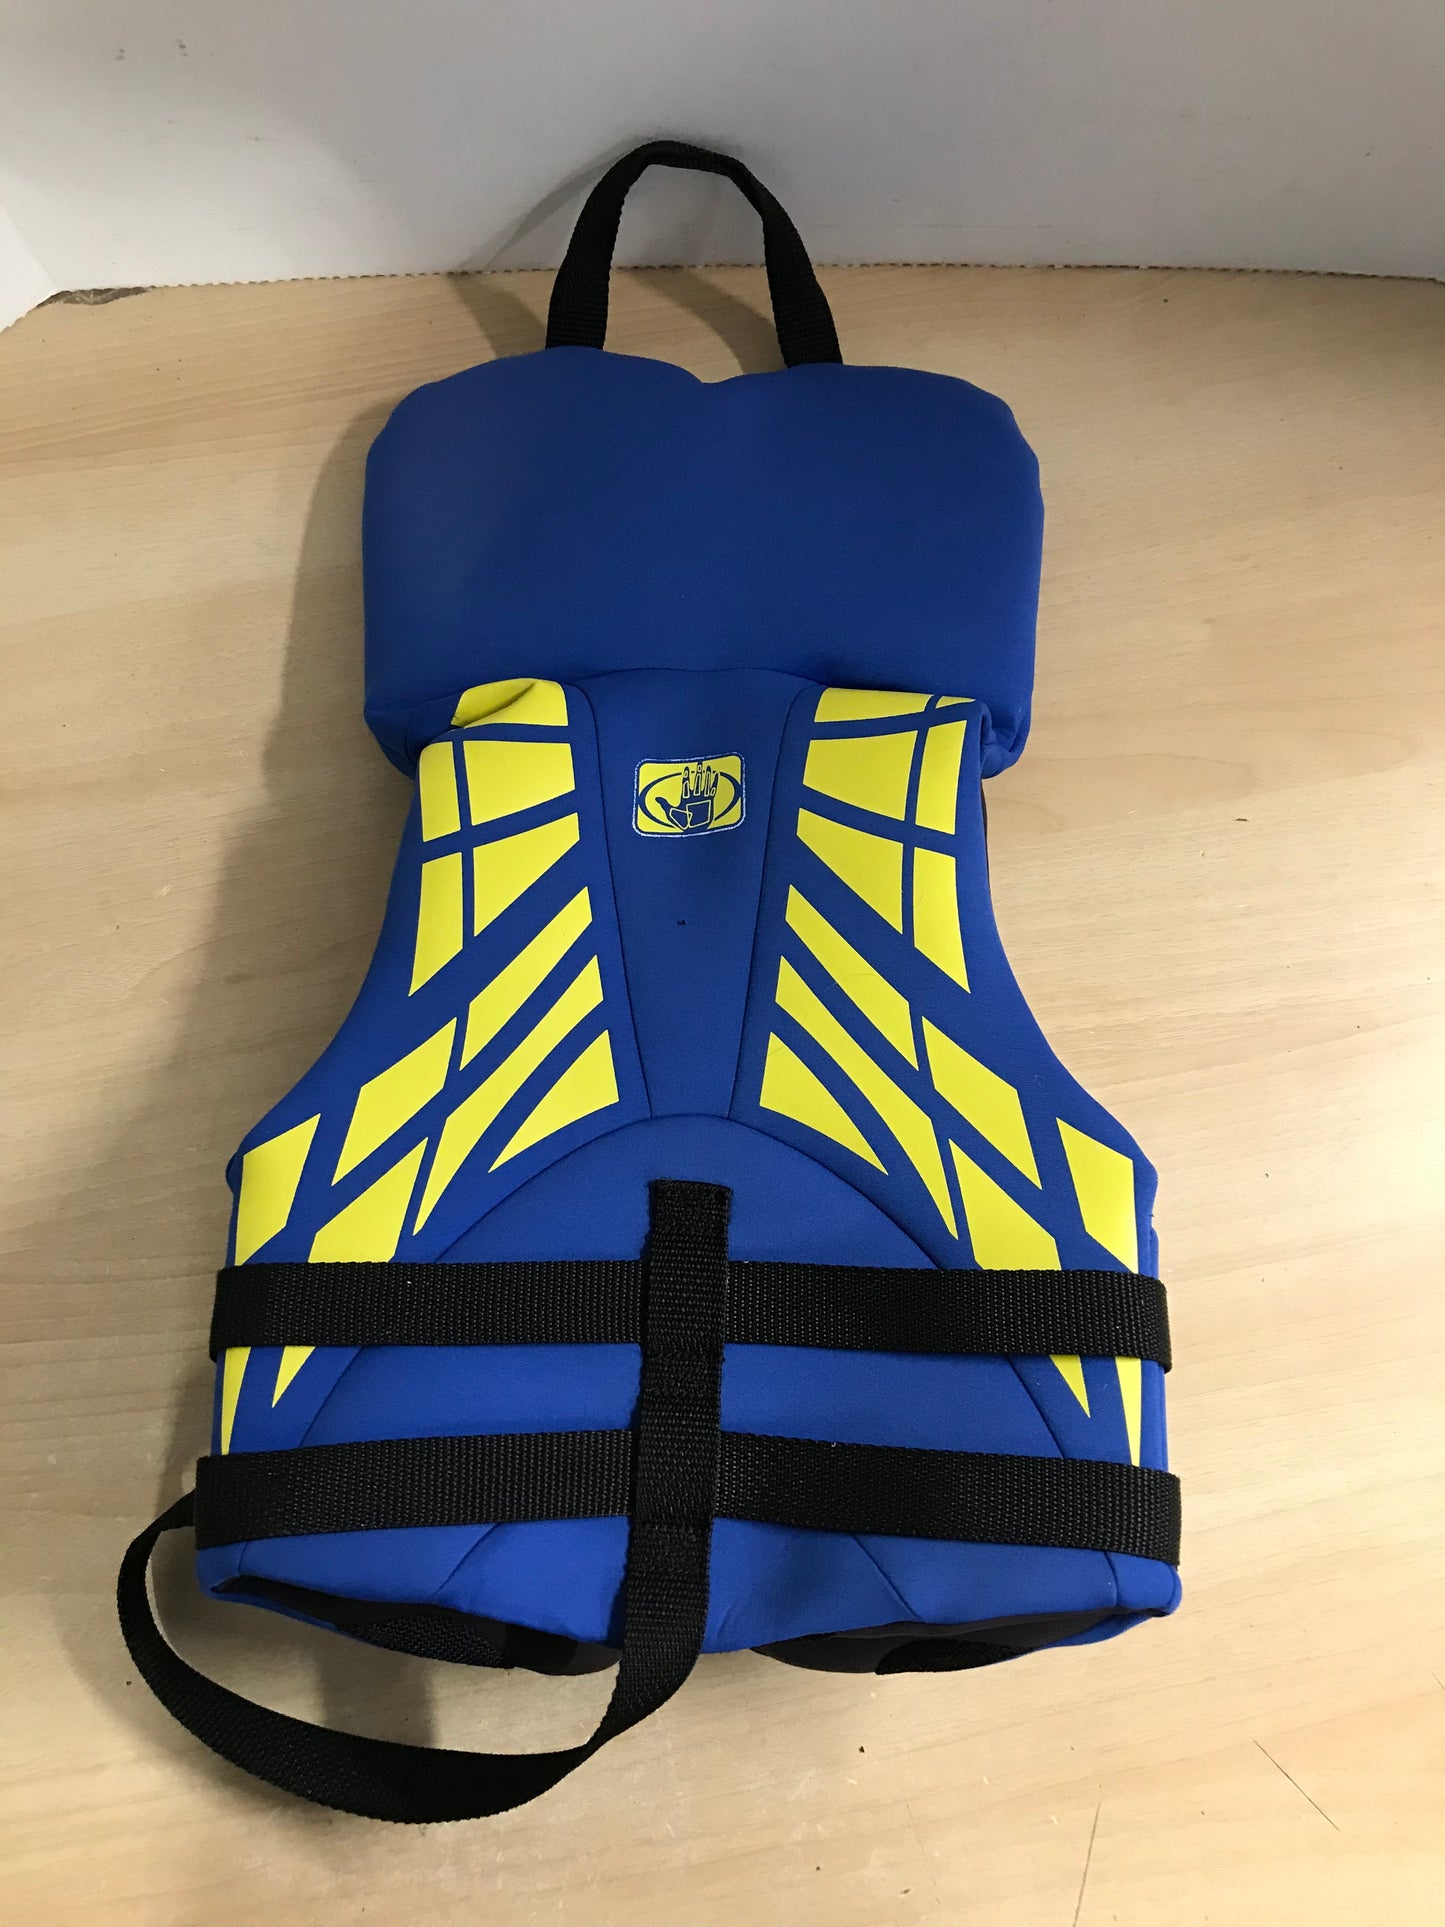 Life Jacket Child Size 30-60 lb Body Glove Blue Yellow Neoprene Excellent